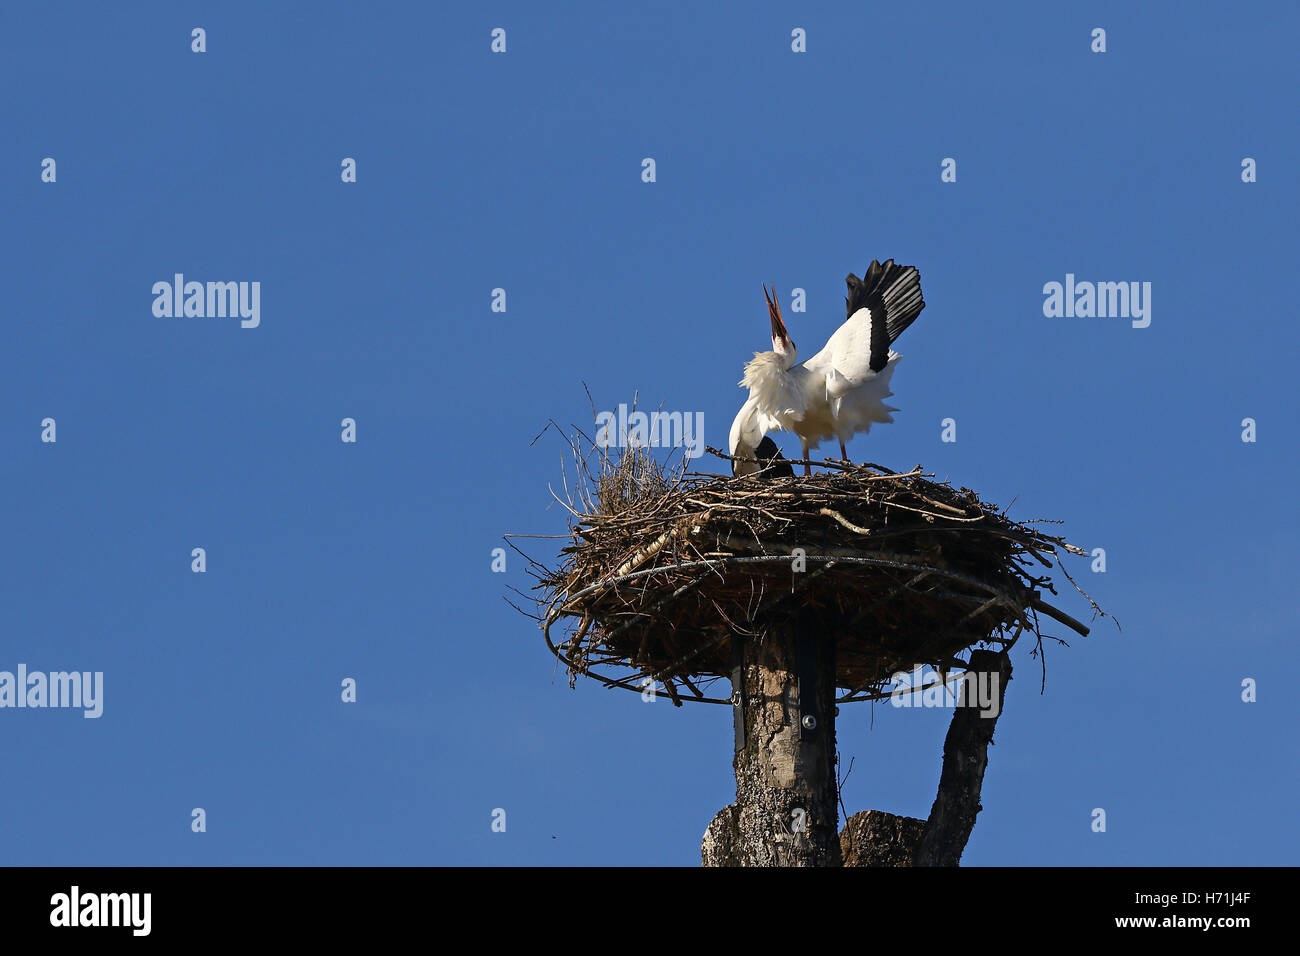 White stork, Ciconia ciconia, during the mating call for females in its nest against clear blue skies Stock Photo